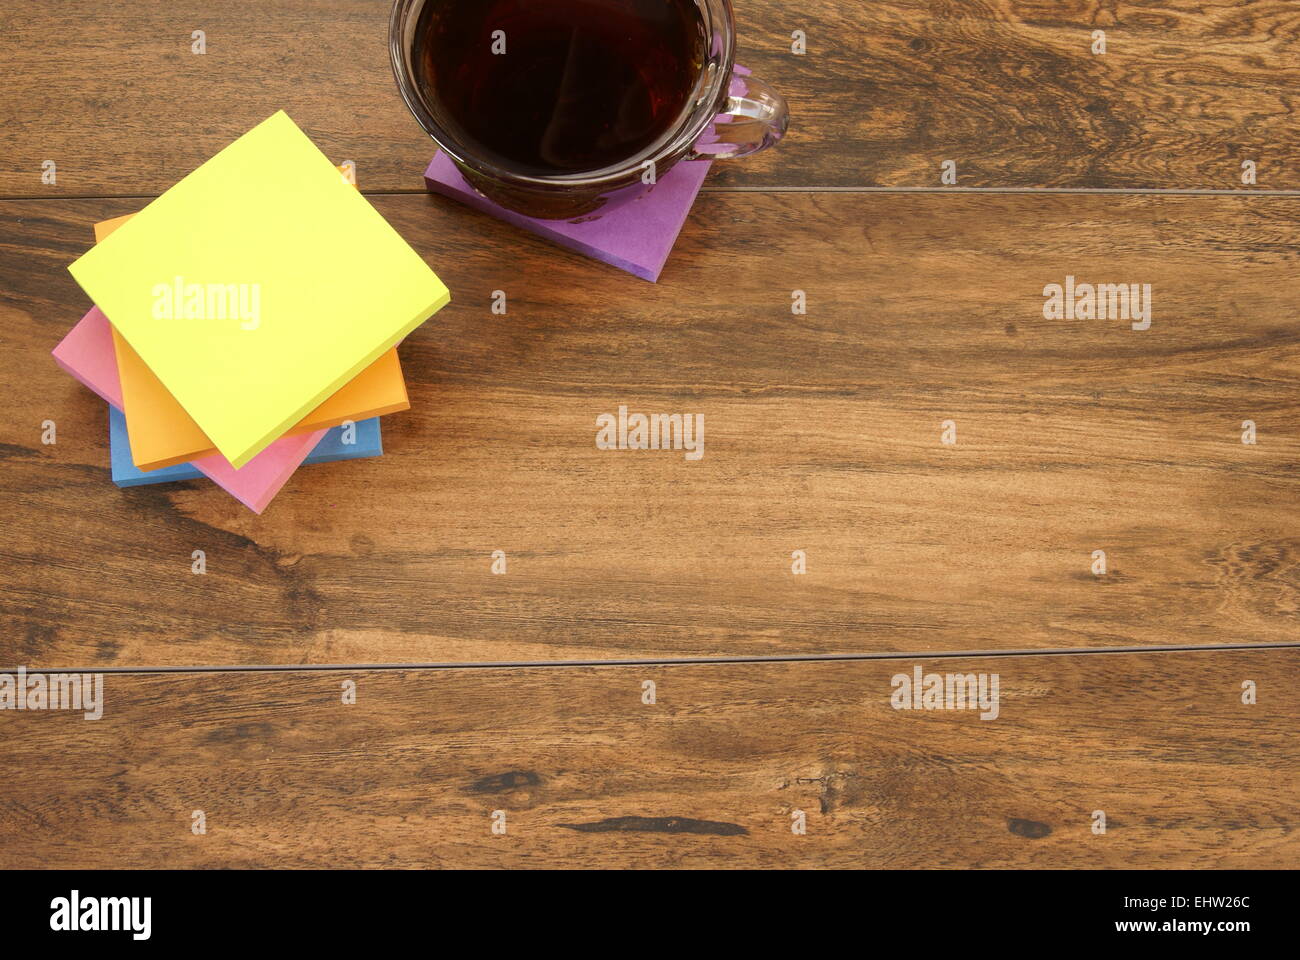 Multi colored notepads laying on a wooden plank board surface with copy space Stock Photo